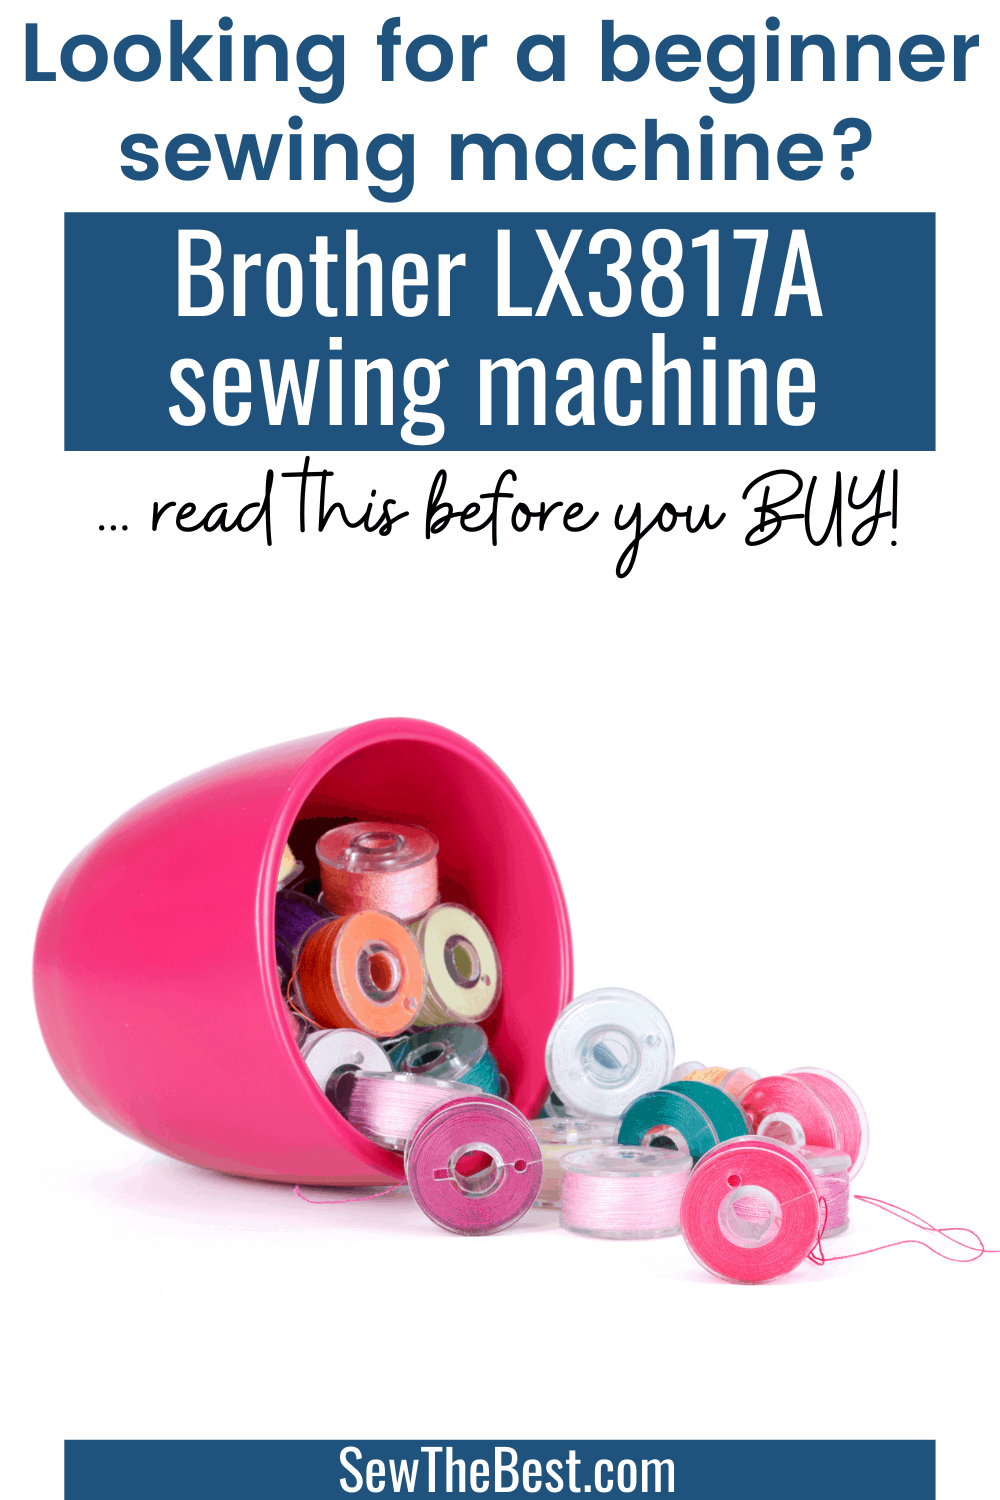 Looking for a beginner sewing machine? Read this Brother LX3817A review before you buy! Brother LX3817A sewing machine, beginner sewing machine, basic sewing machine. #AD #Sewing